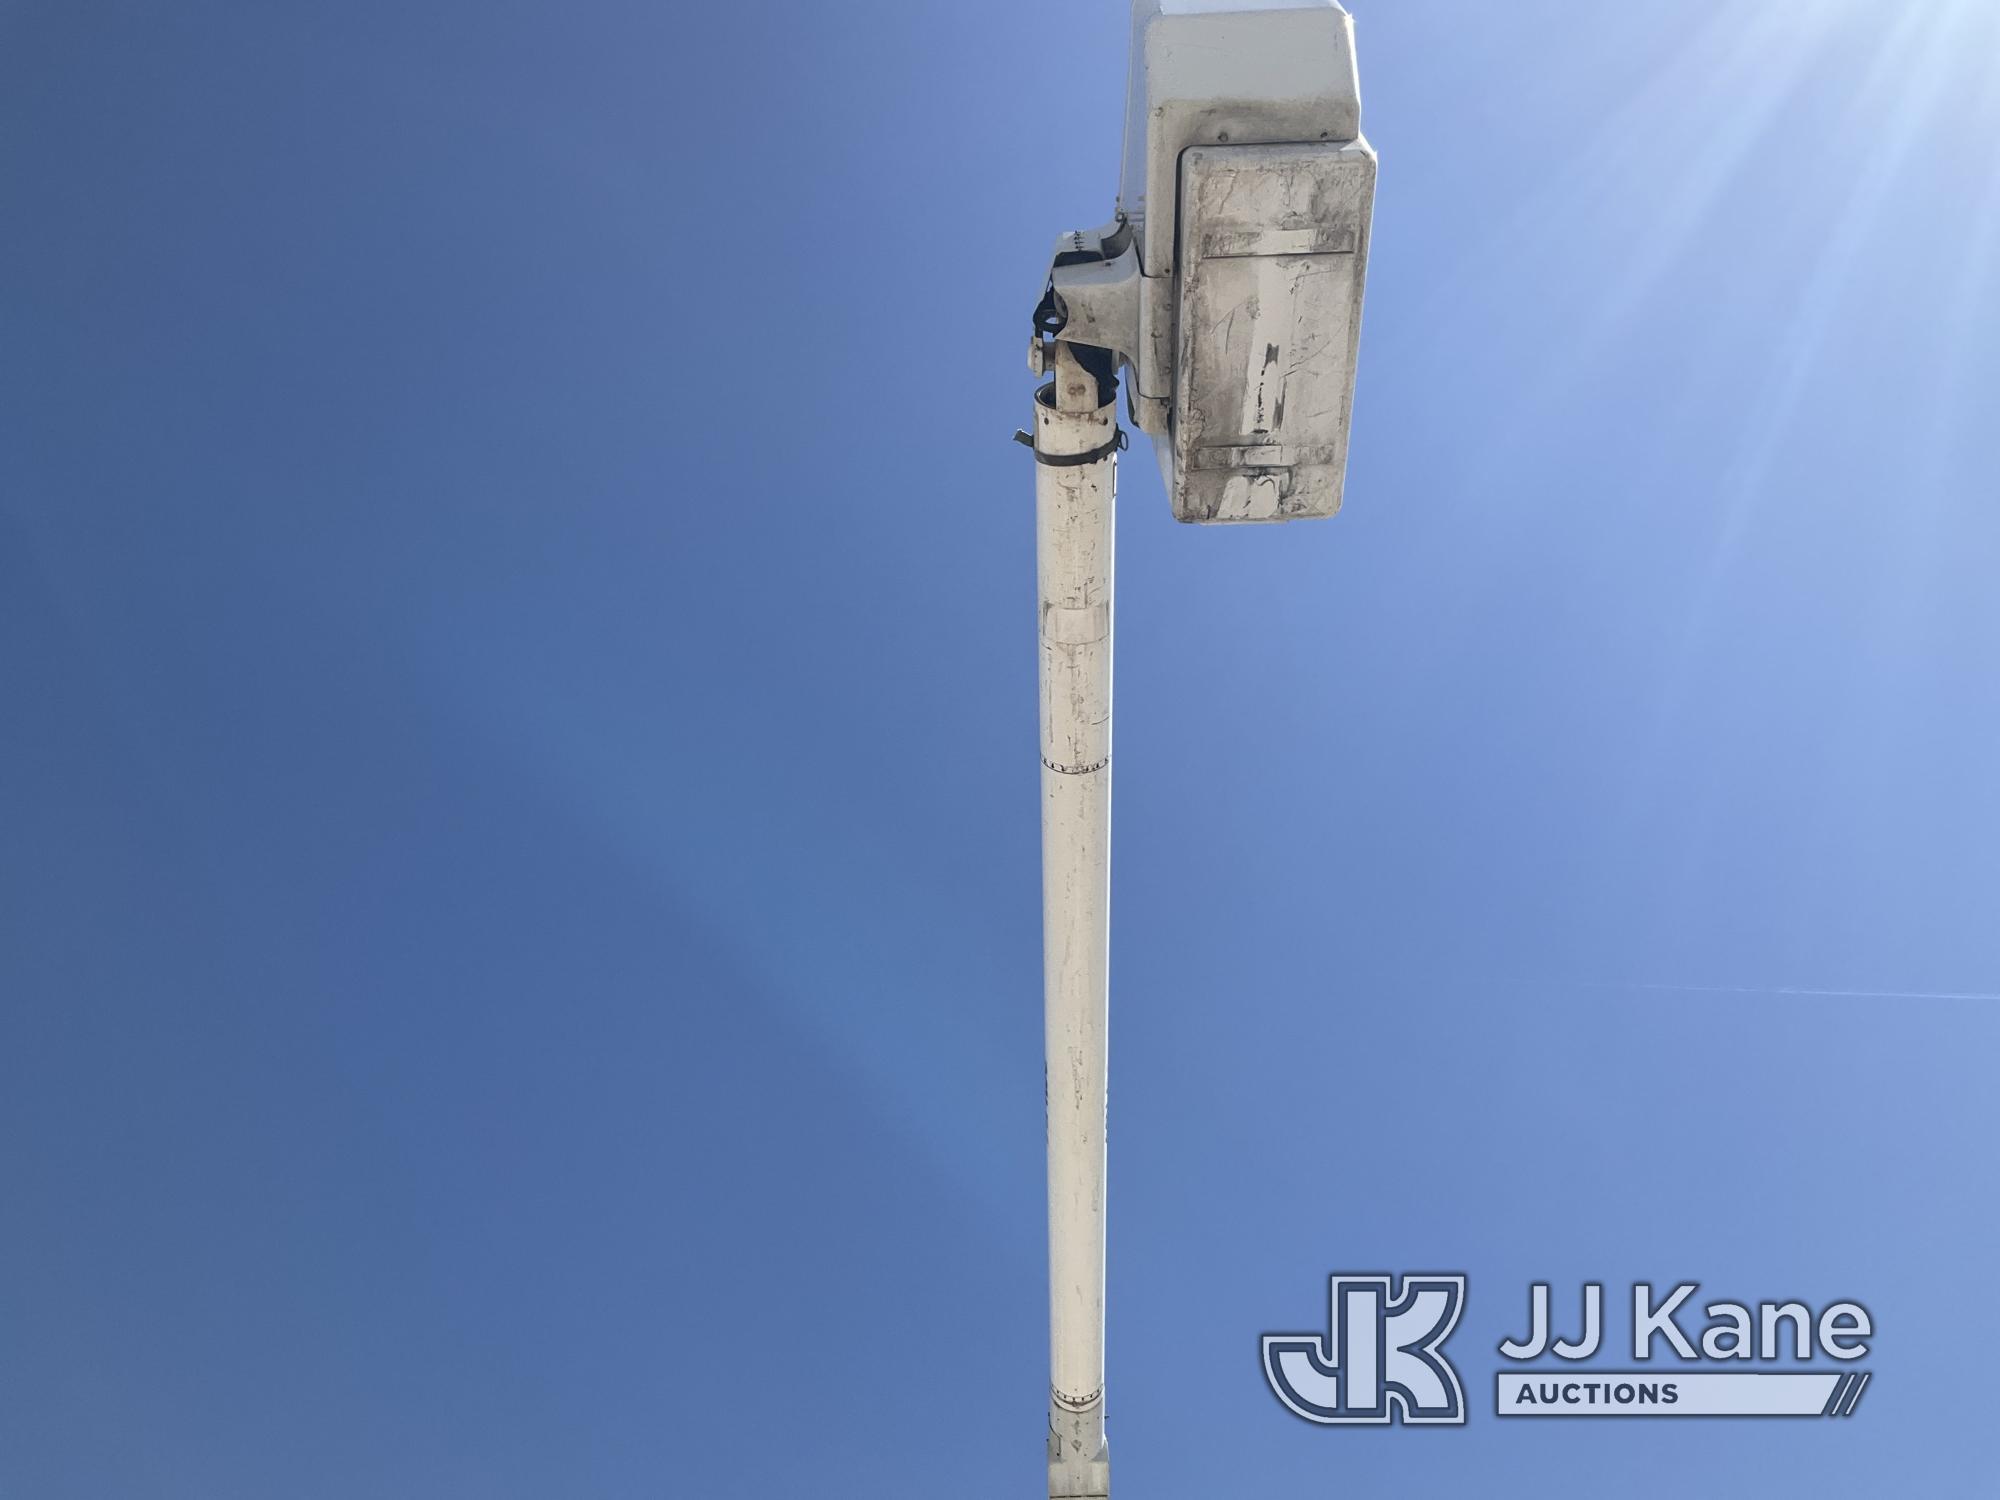 (Kansas City, MO) Altec AA755-P, Bucket rear mounted on 2013 Freightliner M2 106 4x4 Utility Truck R